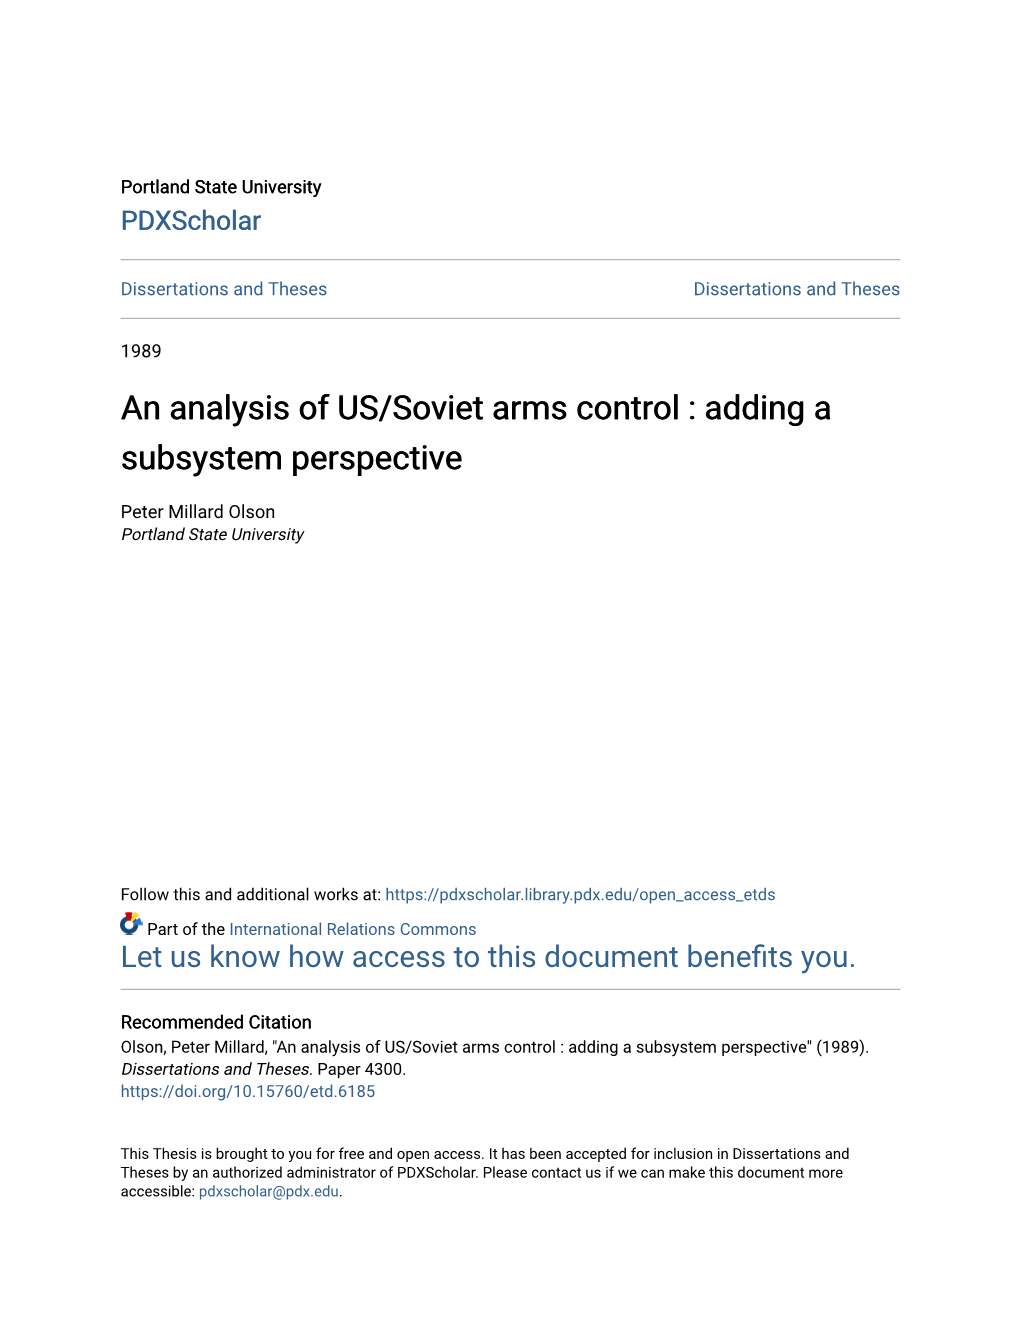 An Analysis of US/Soviet Arms Control : Adding a Subsystem Perspective